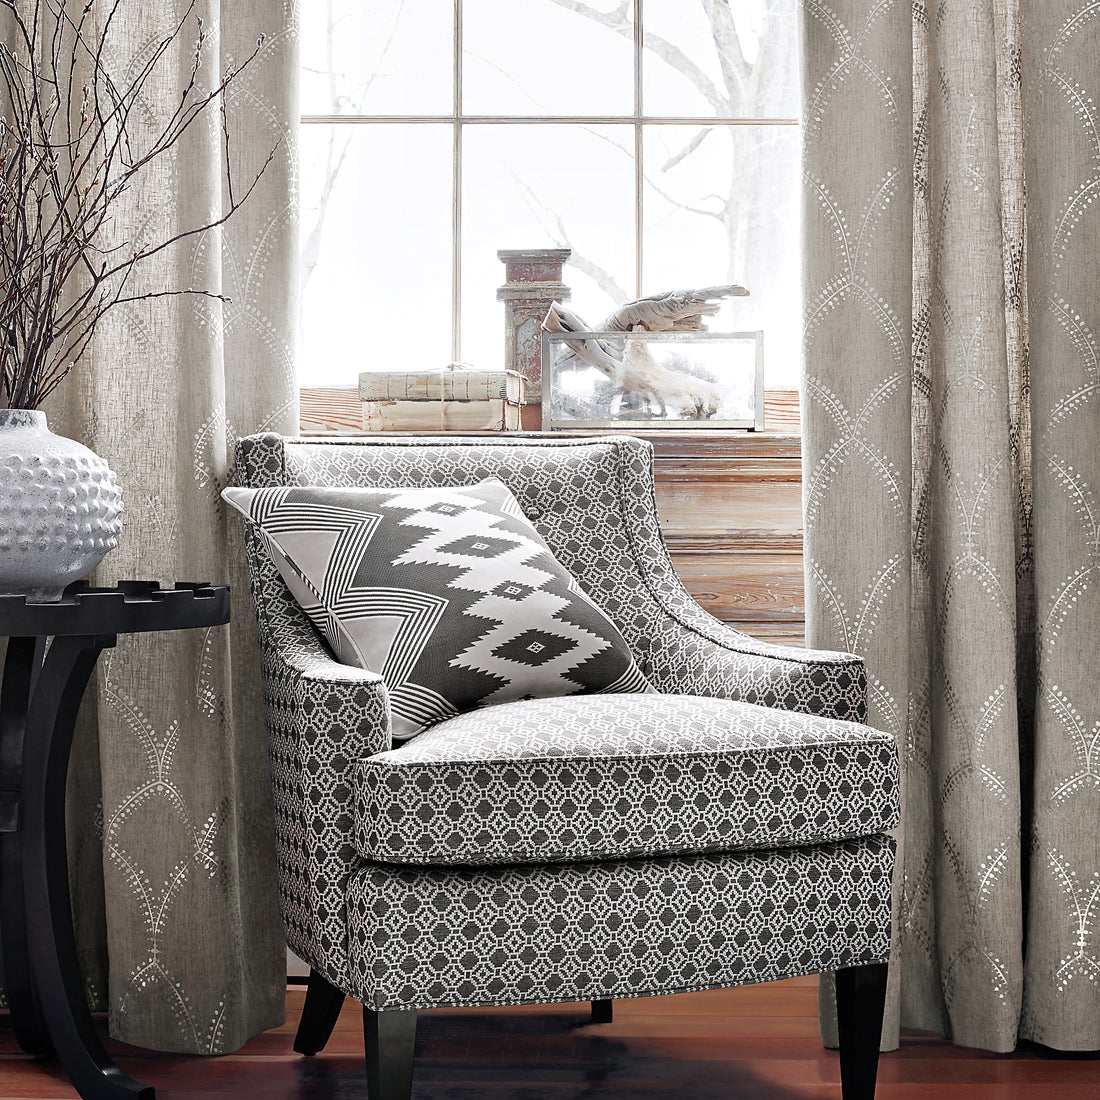 Emerson Chair in Amalfi woven fabric in Charcoal - pattern number AW73036 - by Anna French in the Meridian collection